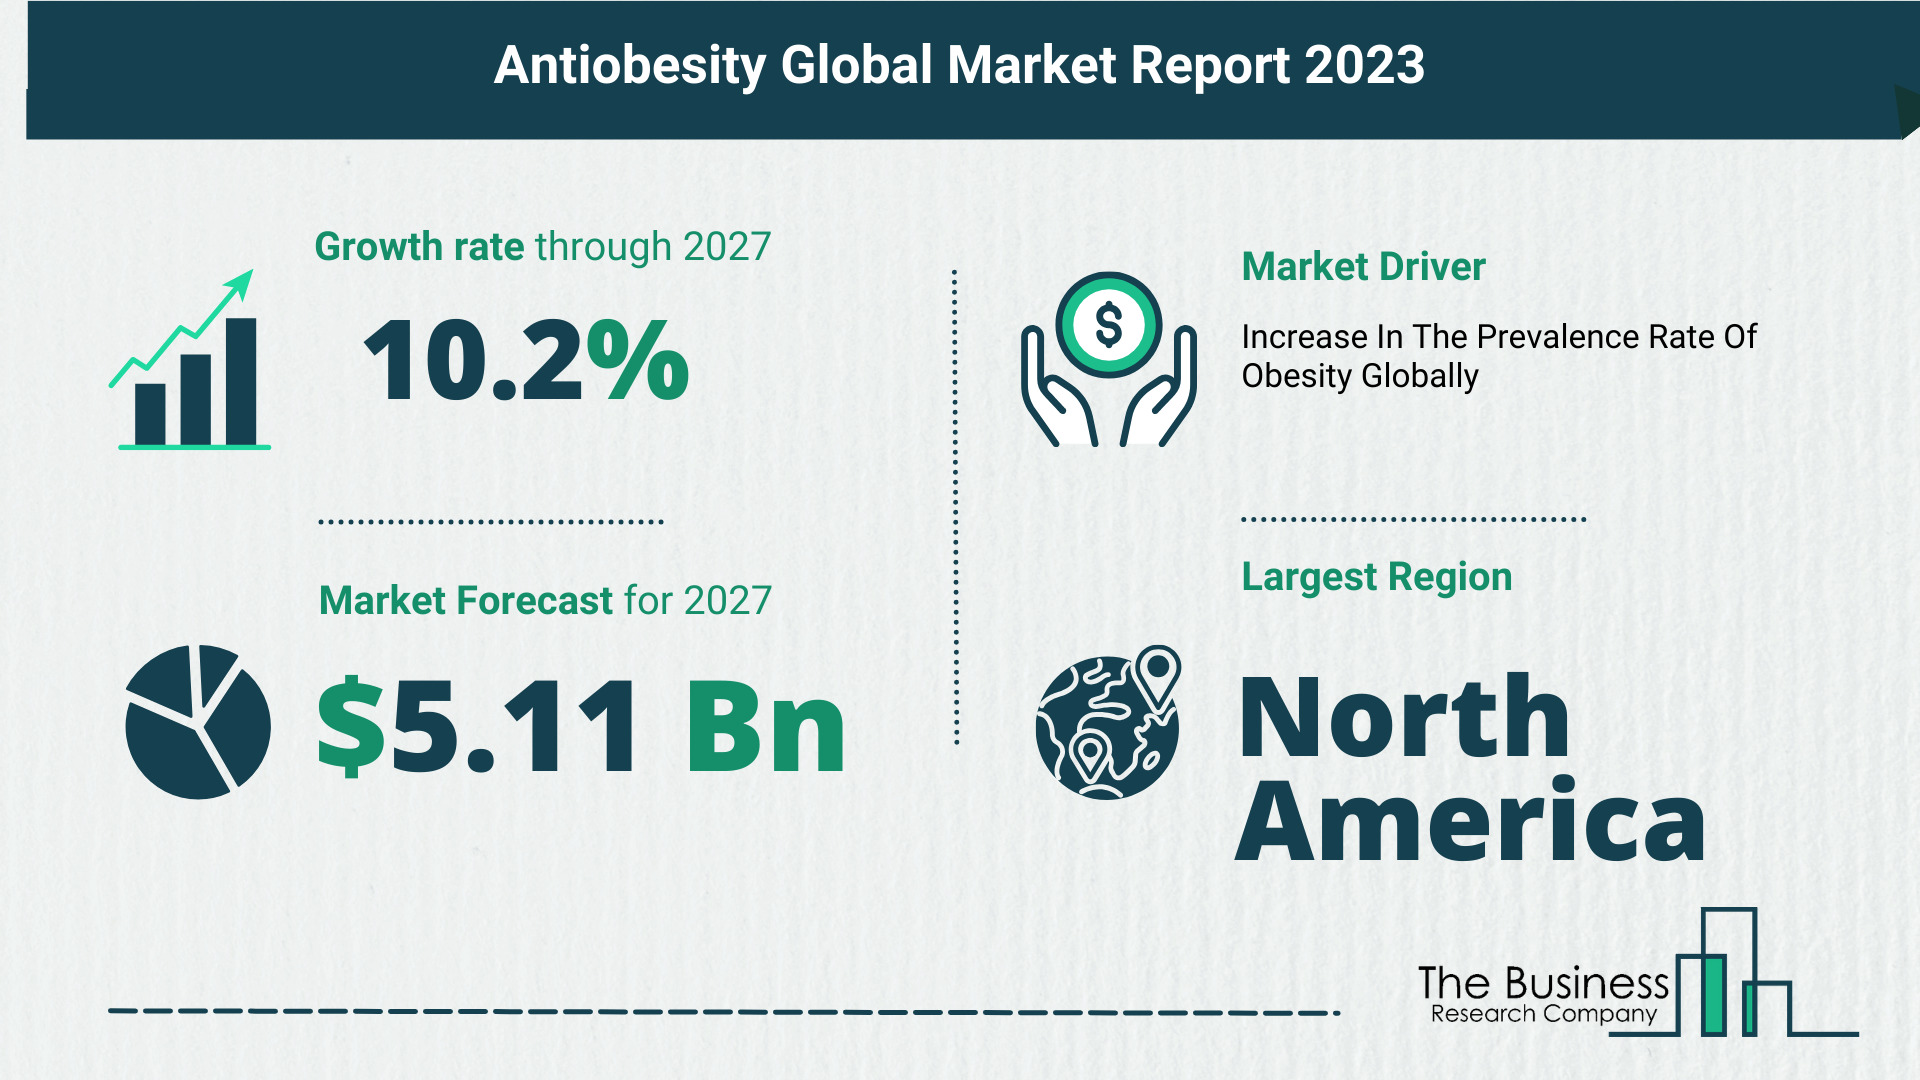 Understand How The Antiobesity Market Is Poised To Grow Through 2023-2032